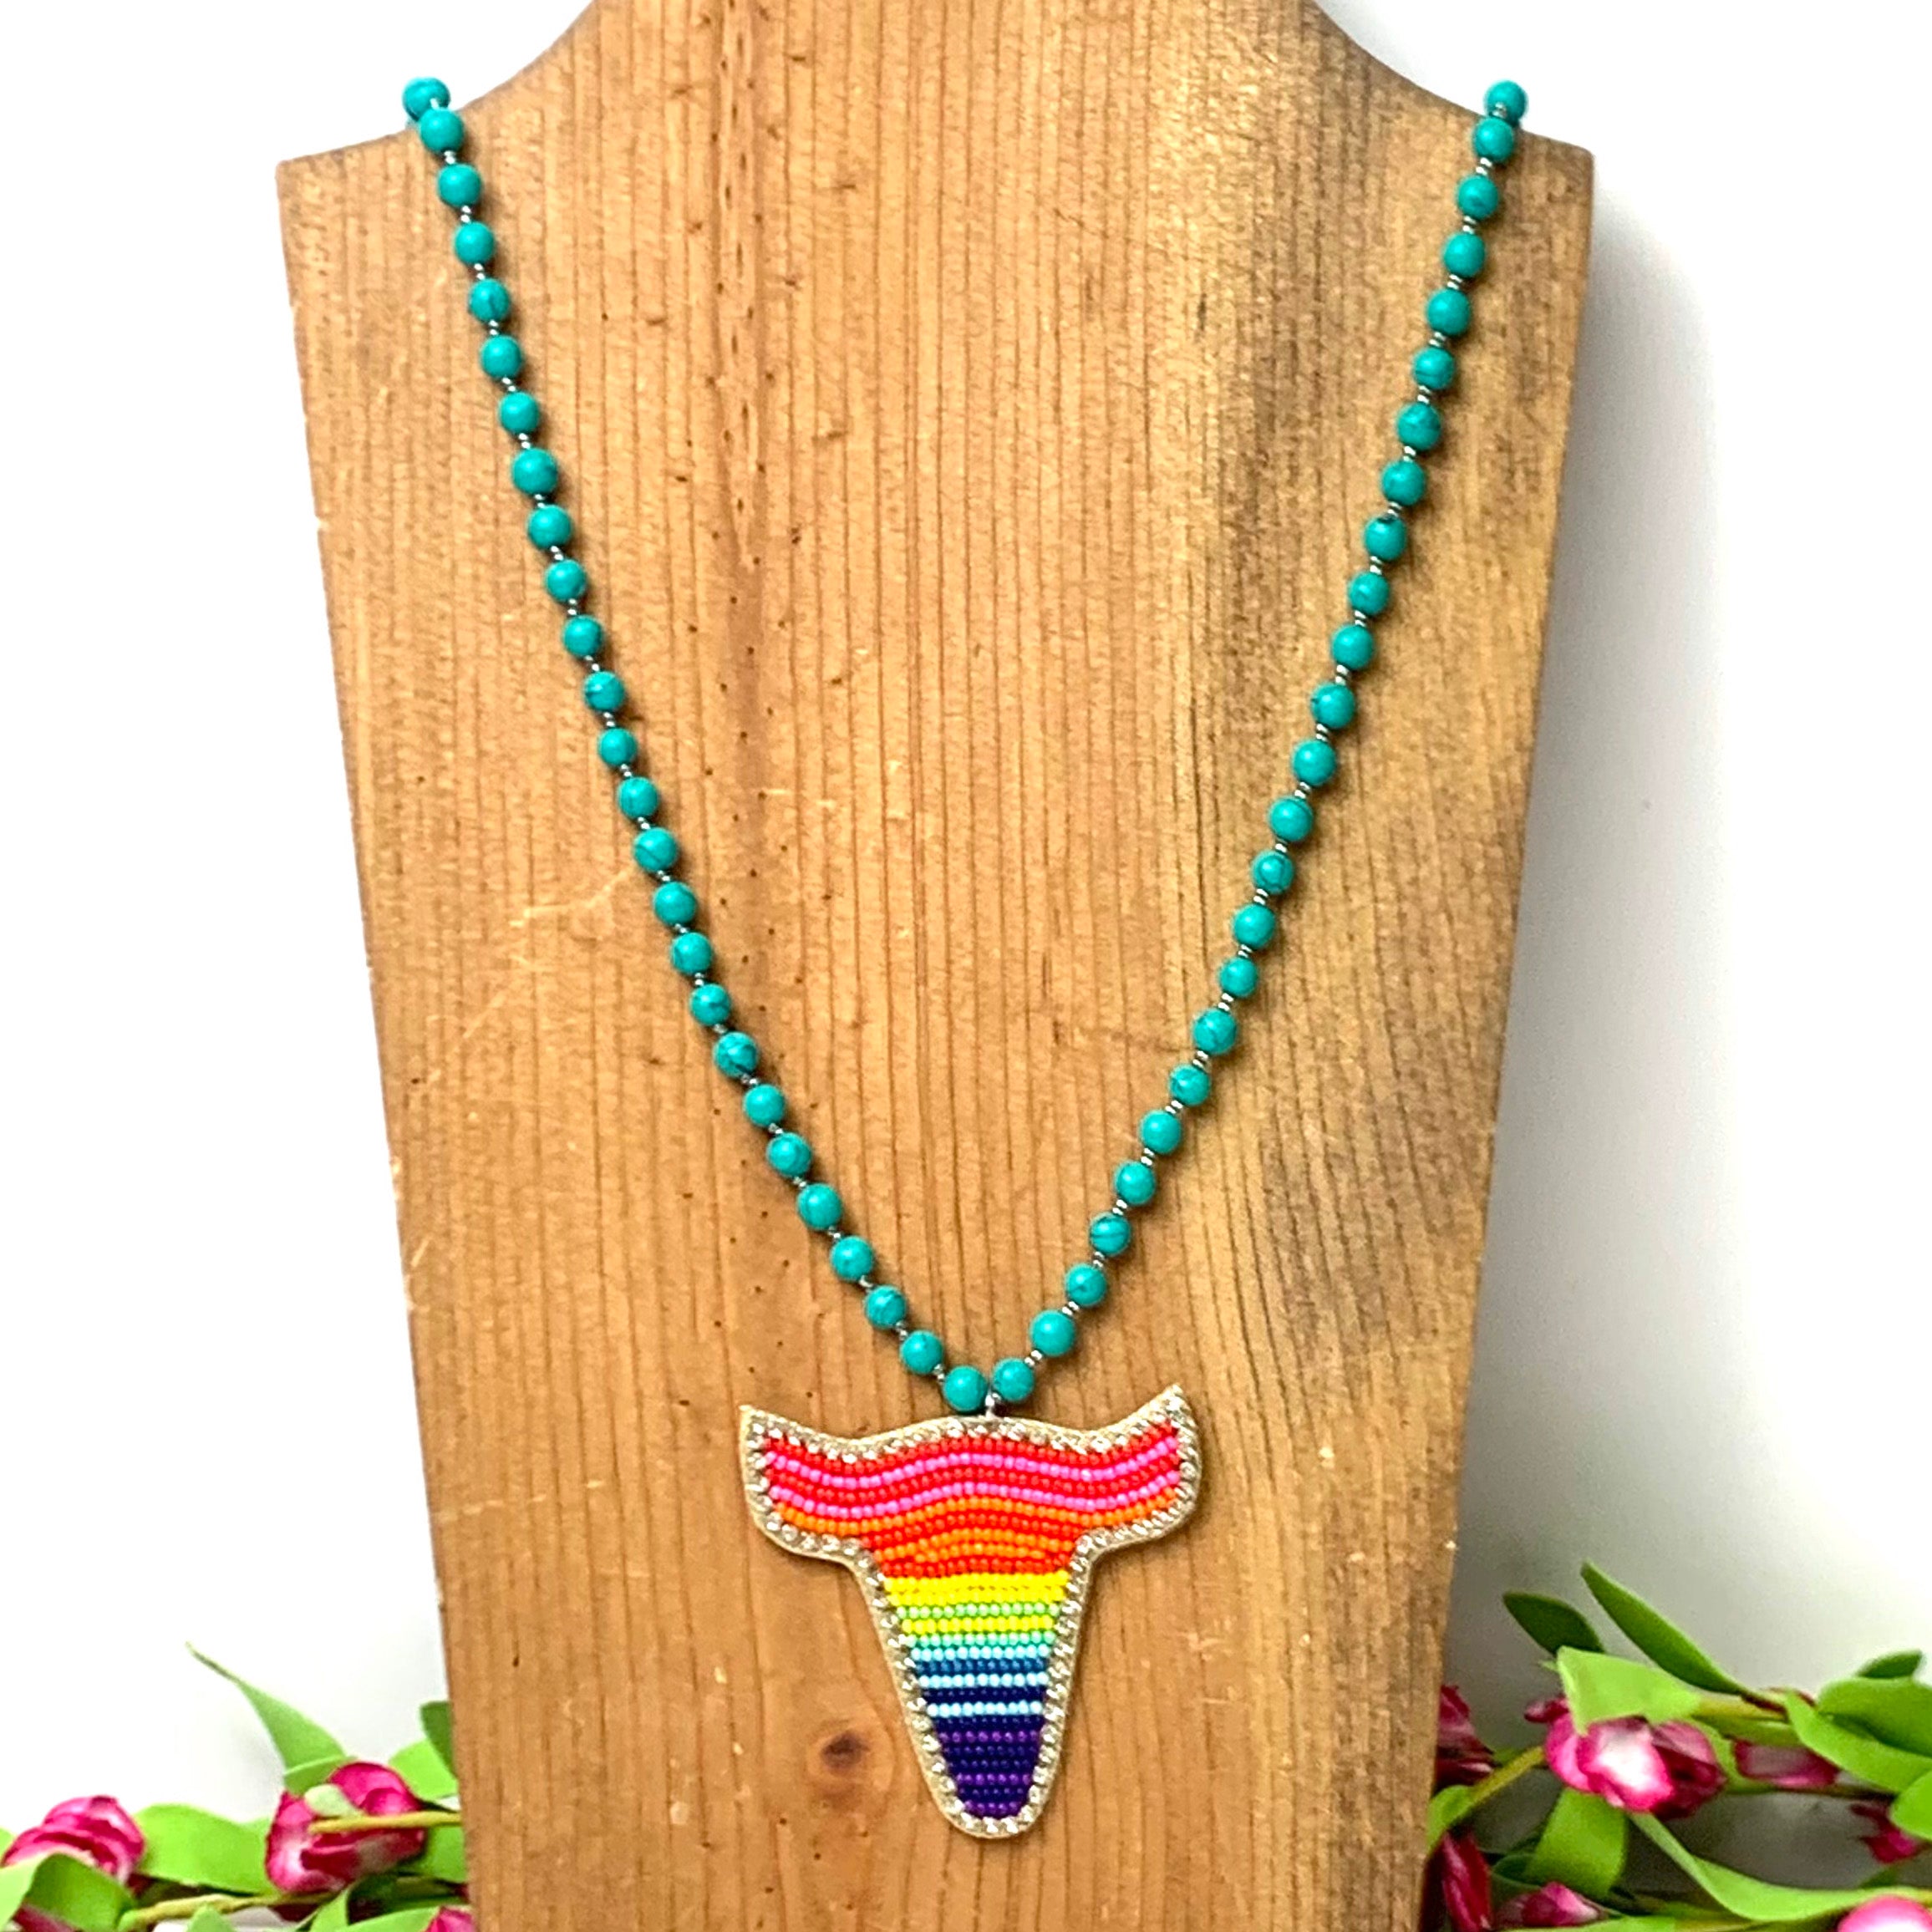 Faux Turquoise Beaded Necklace with Rainbow Seed Bead and Rhinestone Bull Pendant - Giddy Up Glamour Boutique